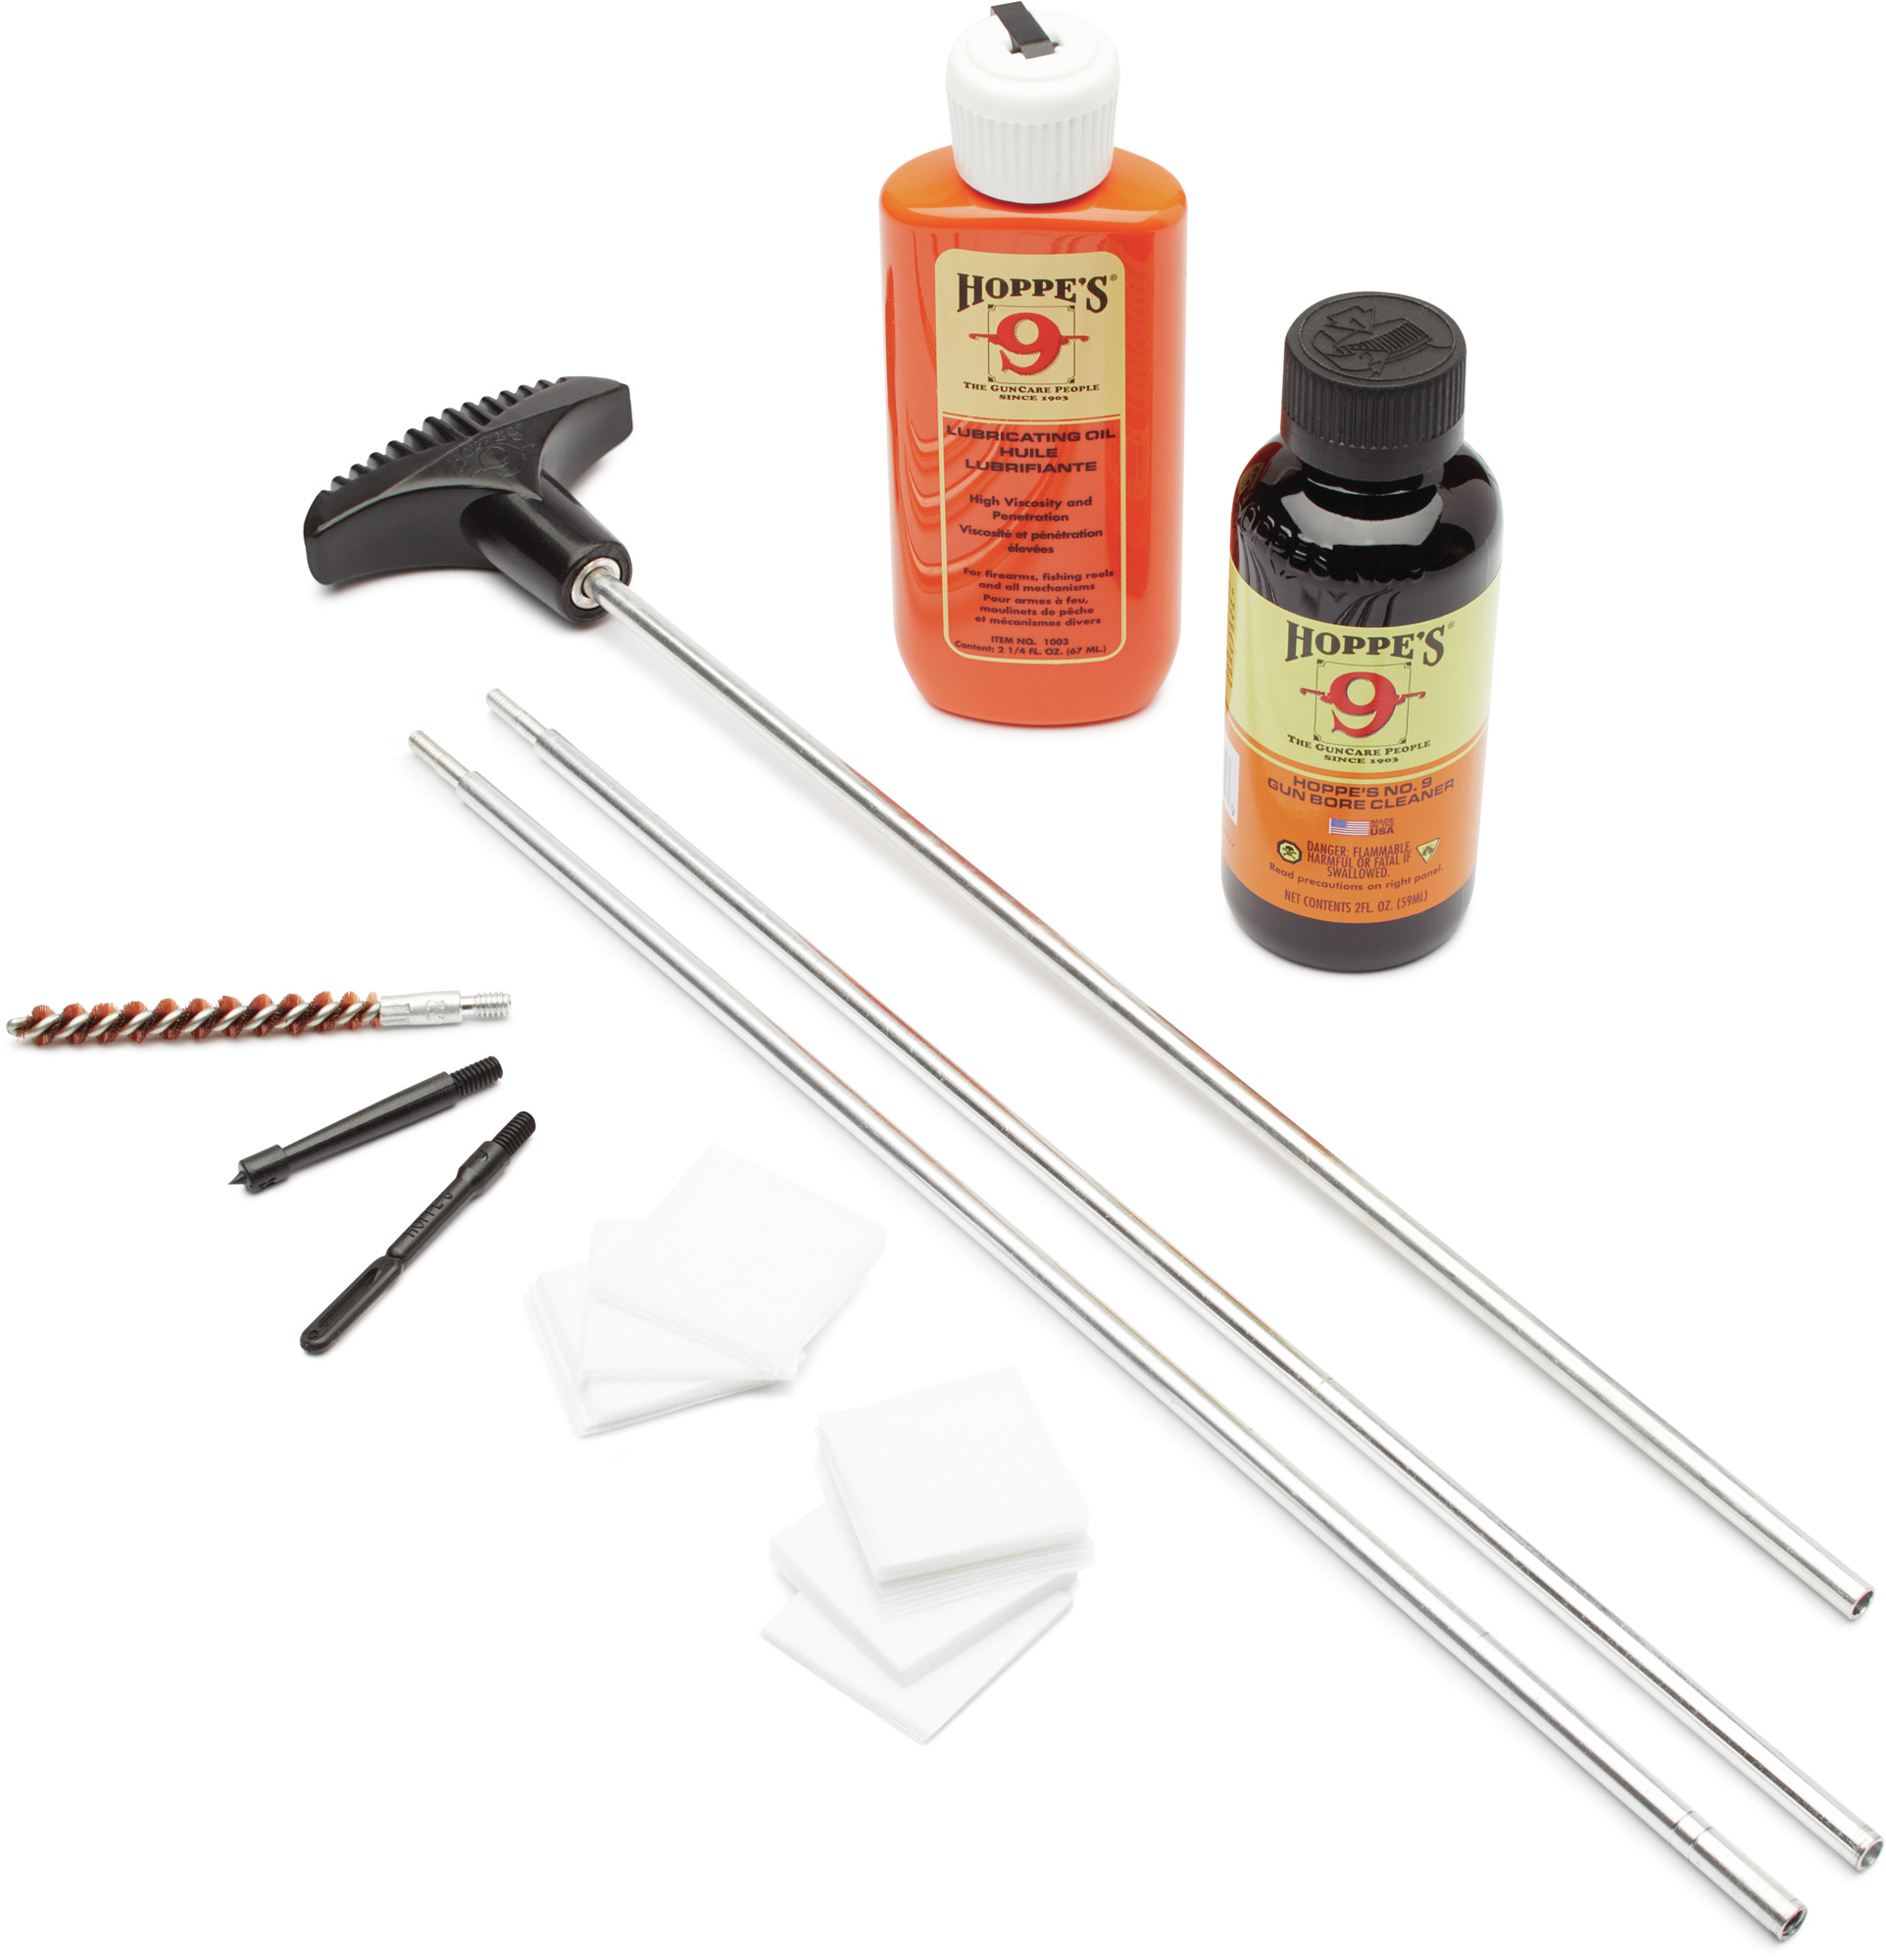 7MM-.30 Caliber Rifle Cleaning Rod